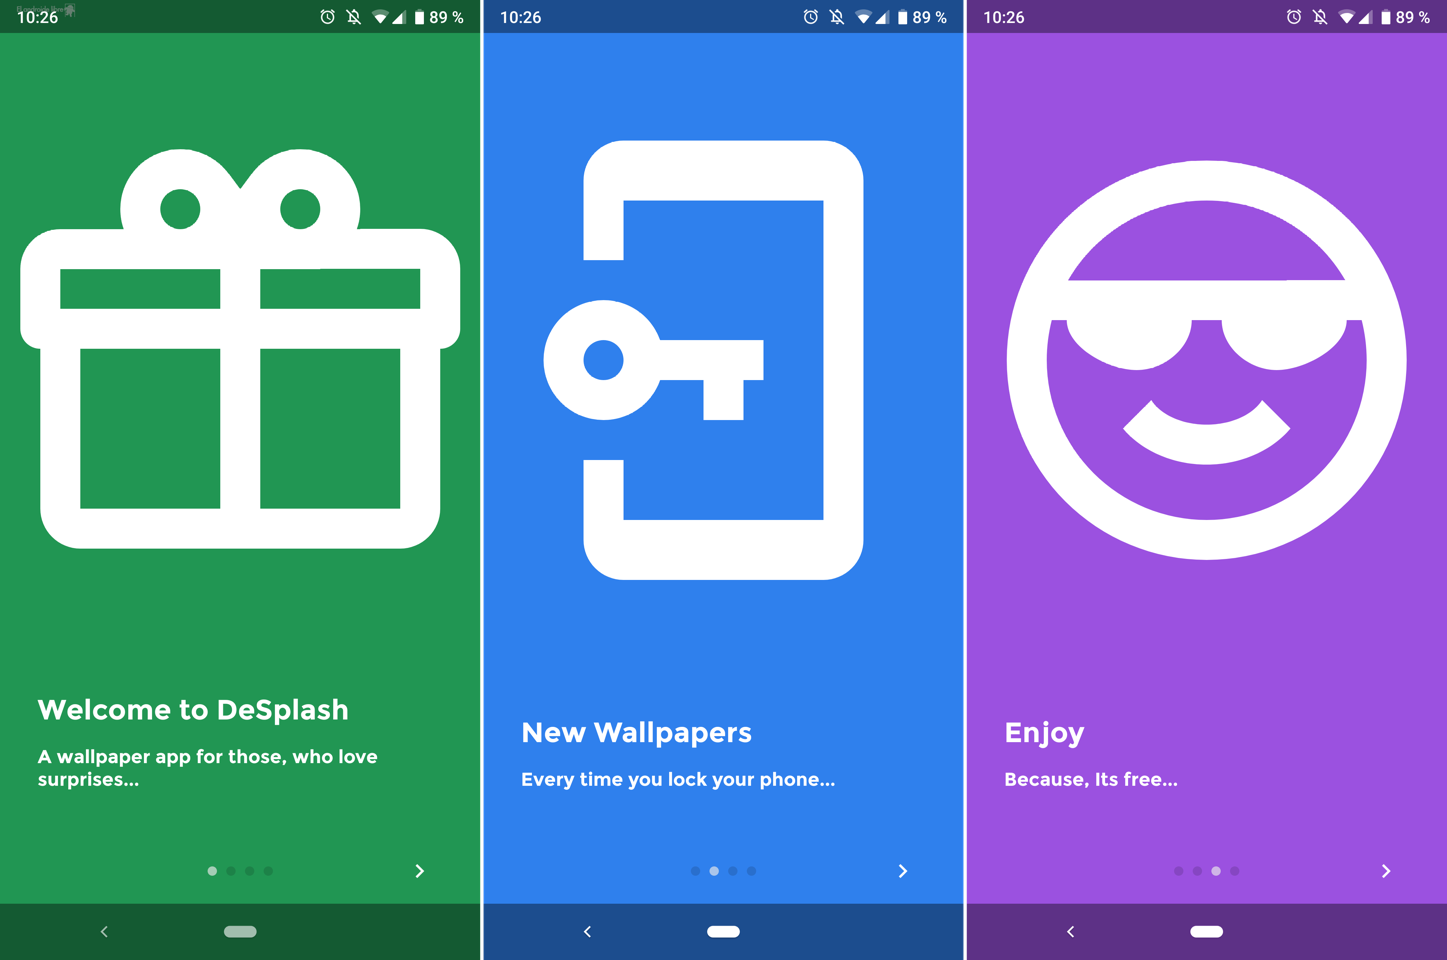 🎖▷ This application changes the wallpaper every time you unlock the mobile